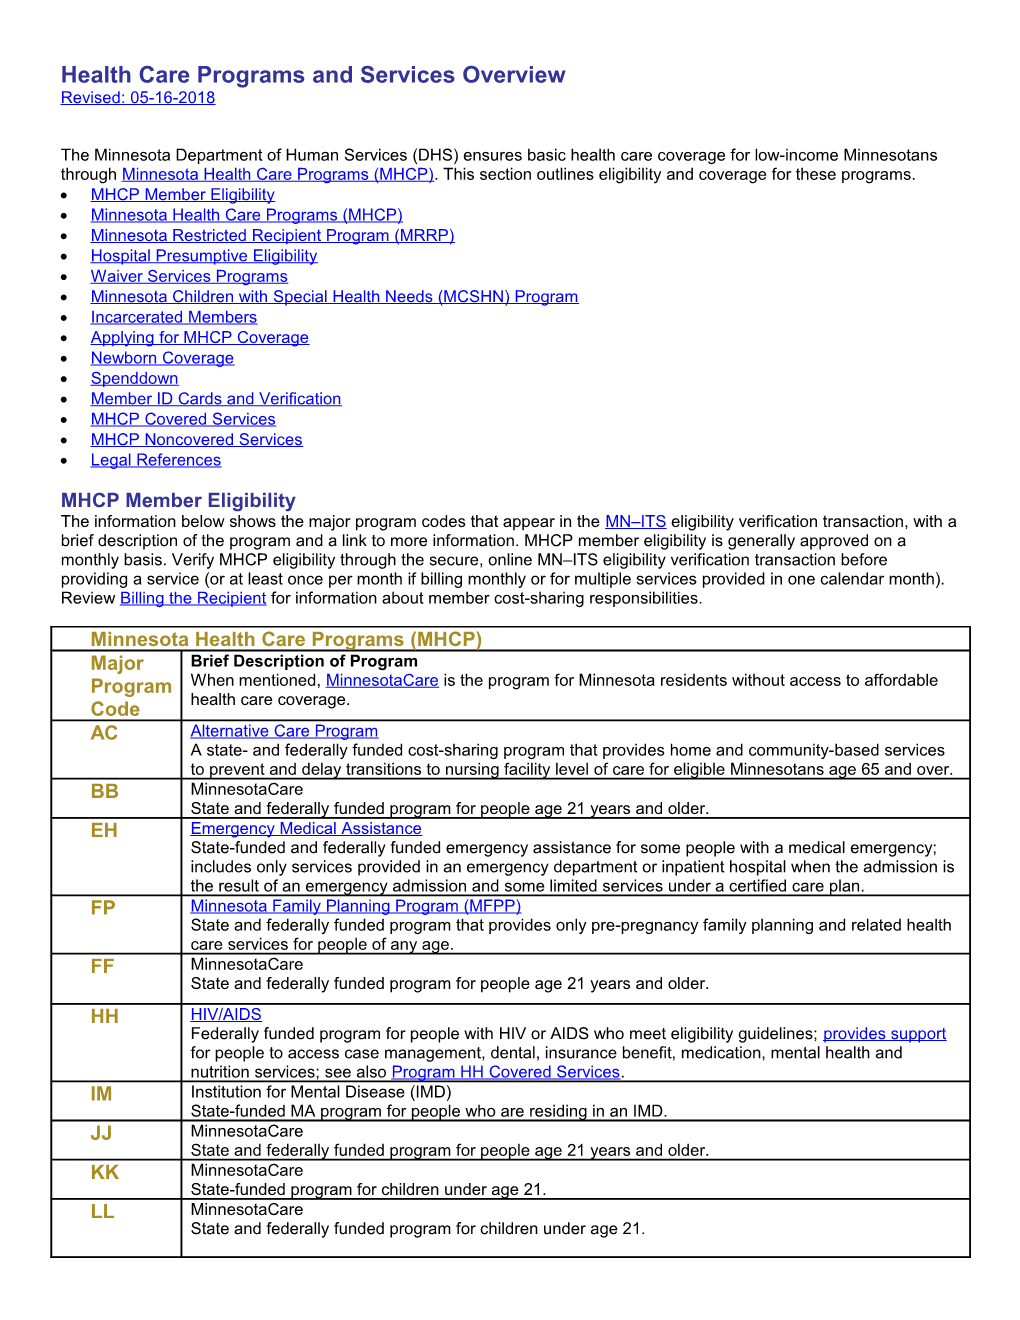 HC-Programs-And-Services Id 008922